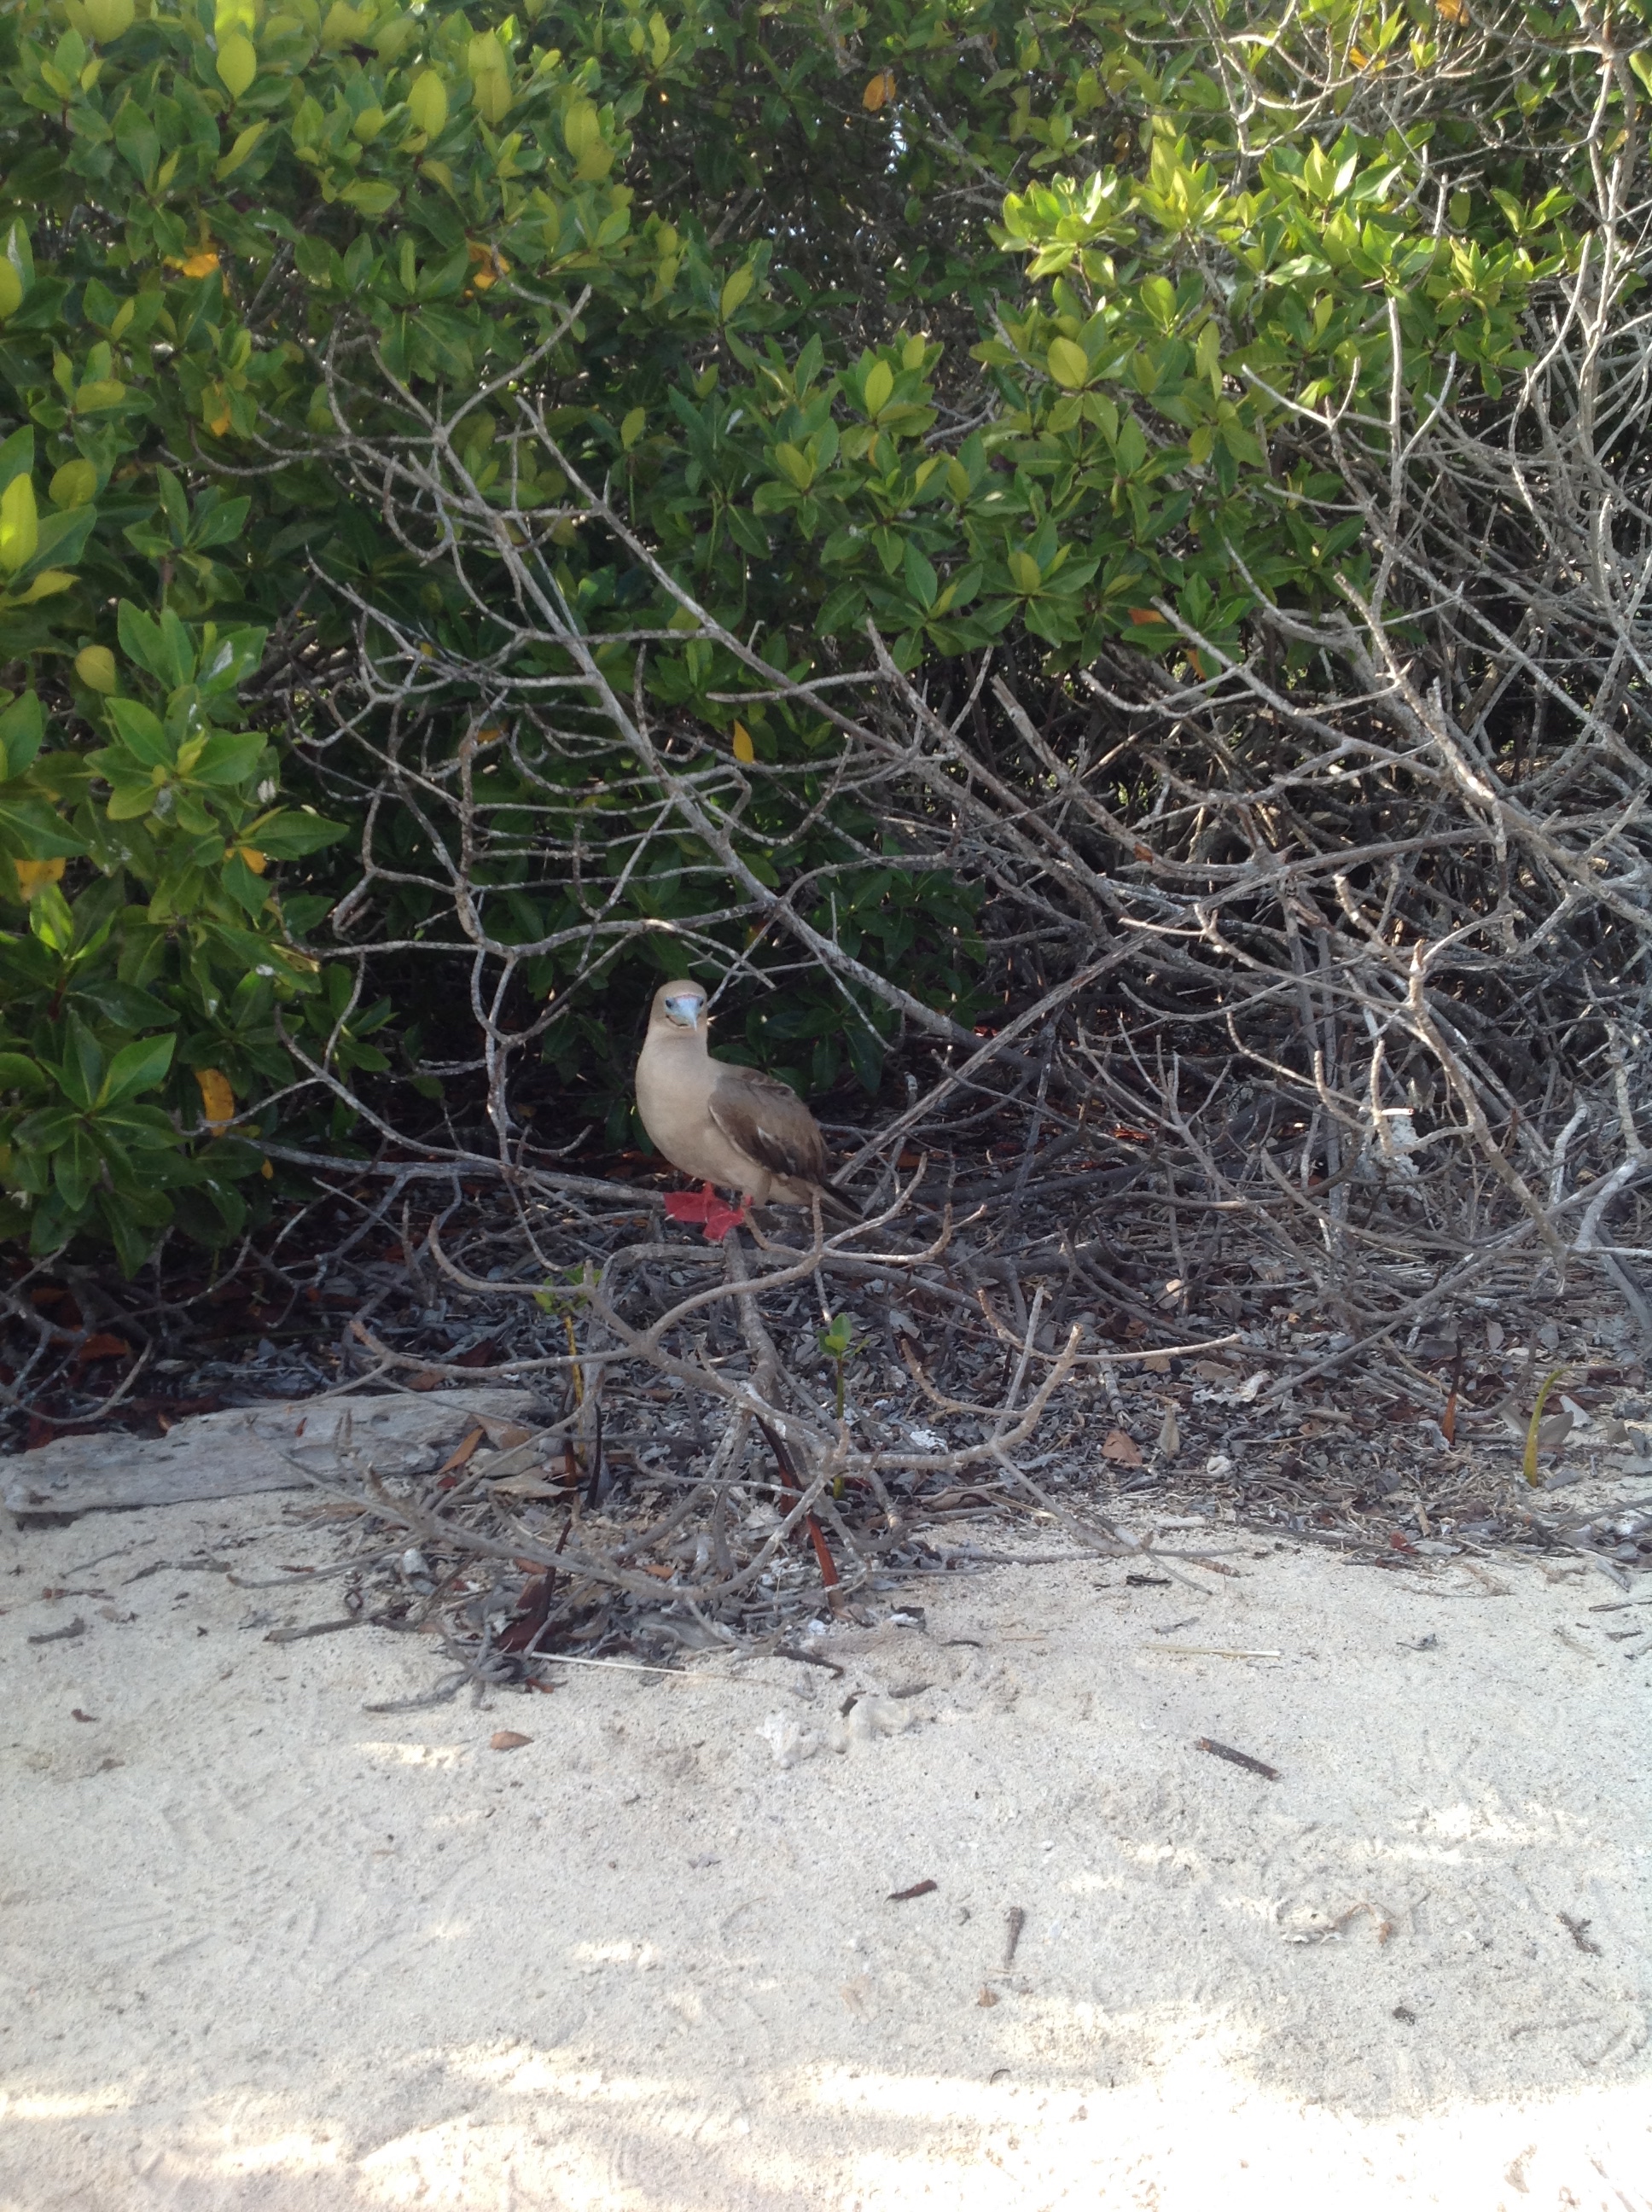 A Red-footed Booby roosting in the mangroves.  